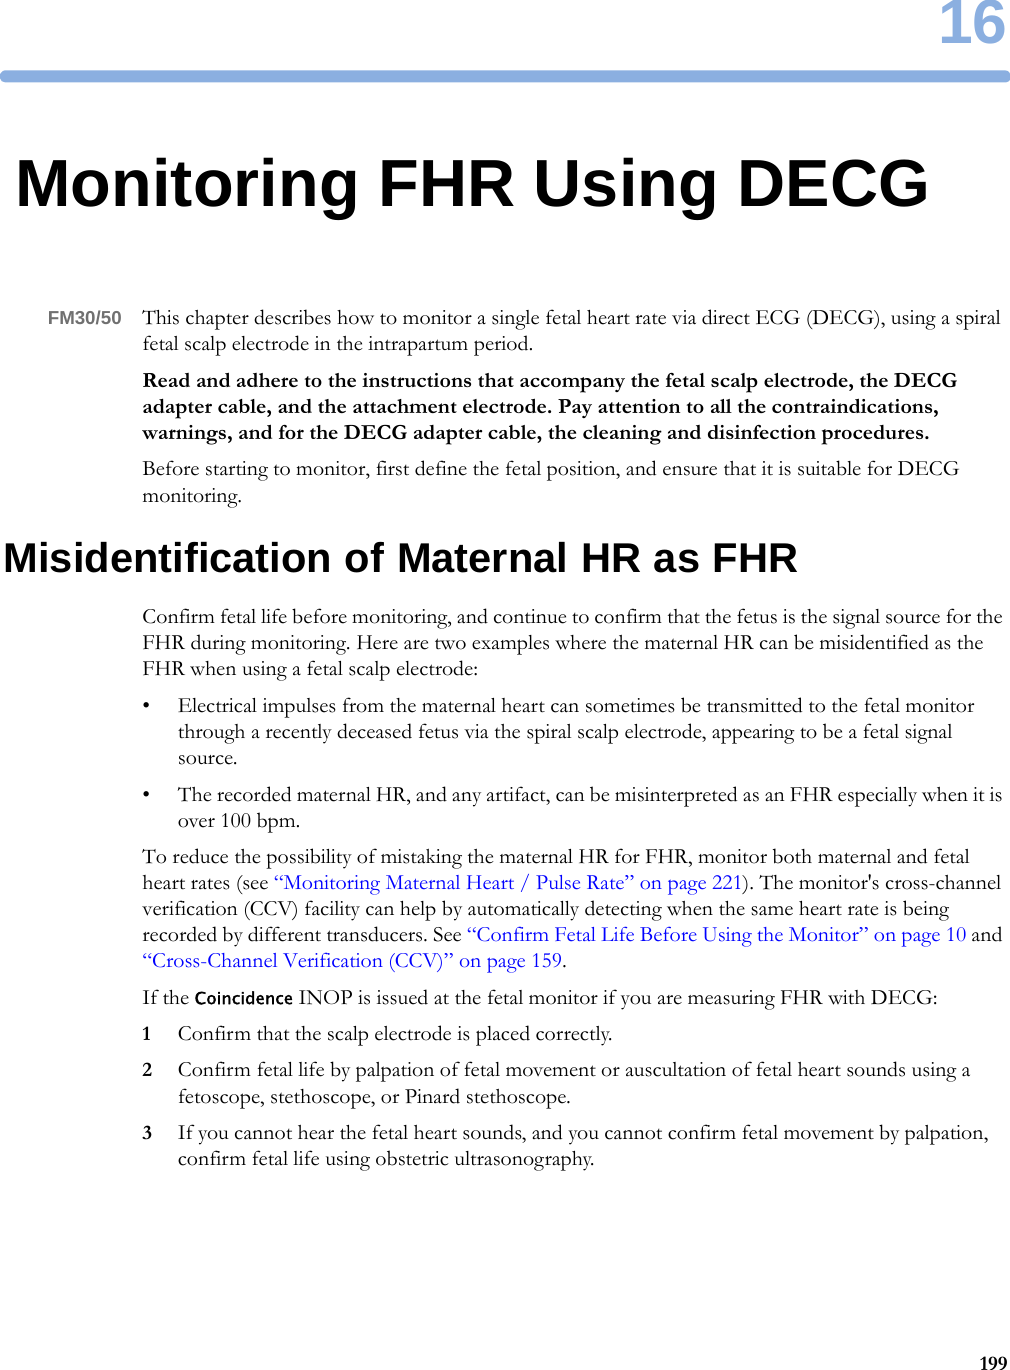 1619916Monitoring FHR Using DECGFM30/50 This chapter describes how to monitor a single fetal heart rate via direct ECG (DECG), using a spiral fetal scalp electrode in the intrapartum period.Read and adhere to the instructions that accompany the fetal scalp electrode, the DECG adapter cable, and the attachment electrode. Pay attention to all the contraindications, warnings, and for the DECG adapter cable, the cleaning and disinfection procedures.Before starting to monitor, first define the fetal position, and ensure that it is suitable for DECG monitoring.Misidentification of Maternal HR as FHRConfirm fetal life before monitoring, and continue to confirm that the fetus is the signal source for the FHR during monitoring. Here are two examples where the maternal HR can be misidentified as the FHR when using a fetal scalp electrode:• Electrical impulses from the maternal heart can sometimes be transmitted to the fetal monitor through a recently deceased fetus via the spiral scalp electrode, appearing to be a fetal signal source.• The recorded maternal HR, and any artifact, can be misinterpreted as an FHR especially when it is over 100 bpm.To reduce the possibility of mistaking the maternal HR for FHR, monitor both maternal and fetal heart rates (see “Monitoring Maternal Heart / Pulse Rate” on page 221). The monitor&apos;s cross-channel verification (CCV) facility can help by automatically detecting when the same heart rate is being recorded by different transducers. See “Confirm Fetal Life Before Using the Monitor” on page 10 and “Cross-Channel Verification (CCV)” on page 159.If the Coincidence INOP is issued at the fetal monitor if you are measuring FHR with DECG:1Confirm that the scalp electrode is placed correctly.2Confirm fetal life by palpation of fetal movement or auscultation of fetal heart sounds using a fetoscope, stethoscope, or Pinard stethoscope.3If you cannot hear the fetal heart sounds, and you cannot confirm fetal movement by palpation, confirm fetal life using obstetric ultrasonography.